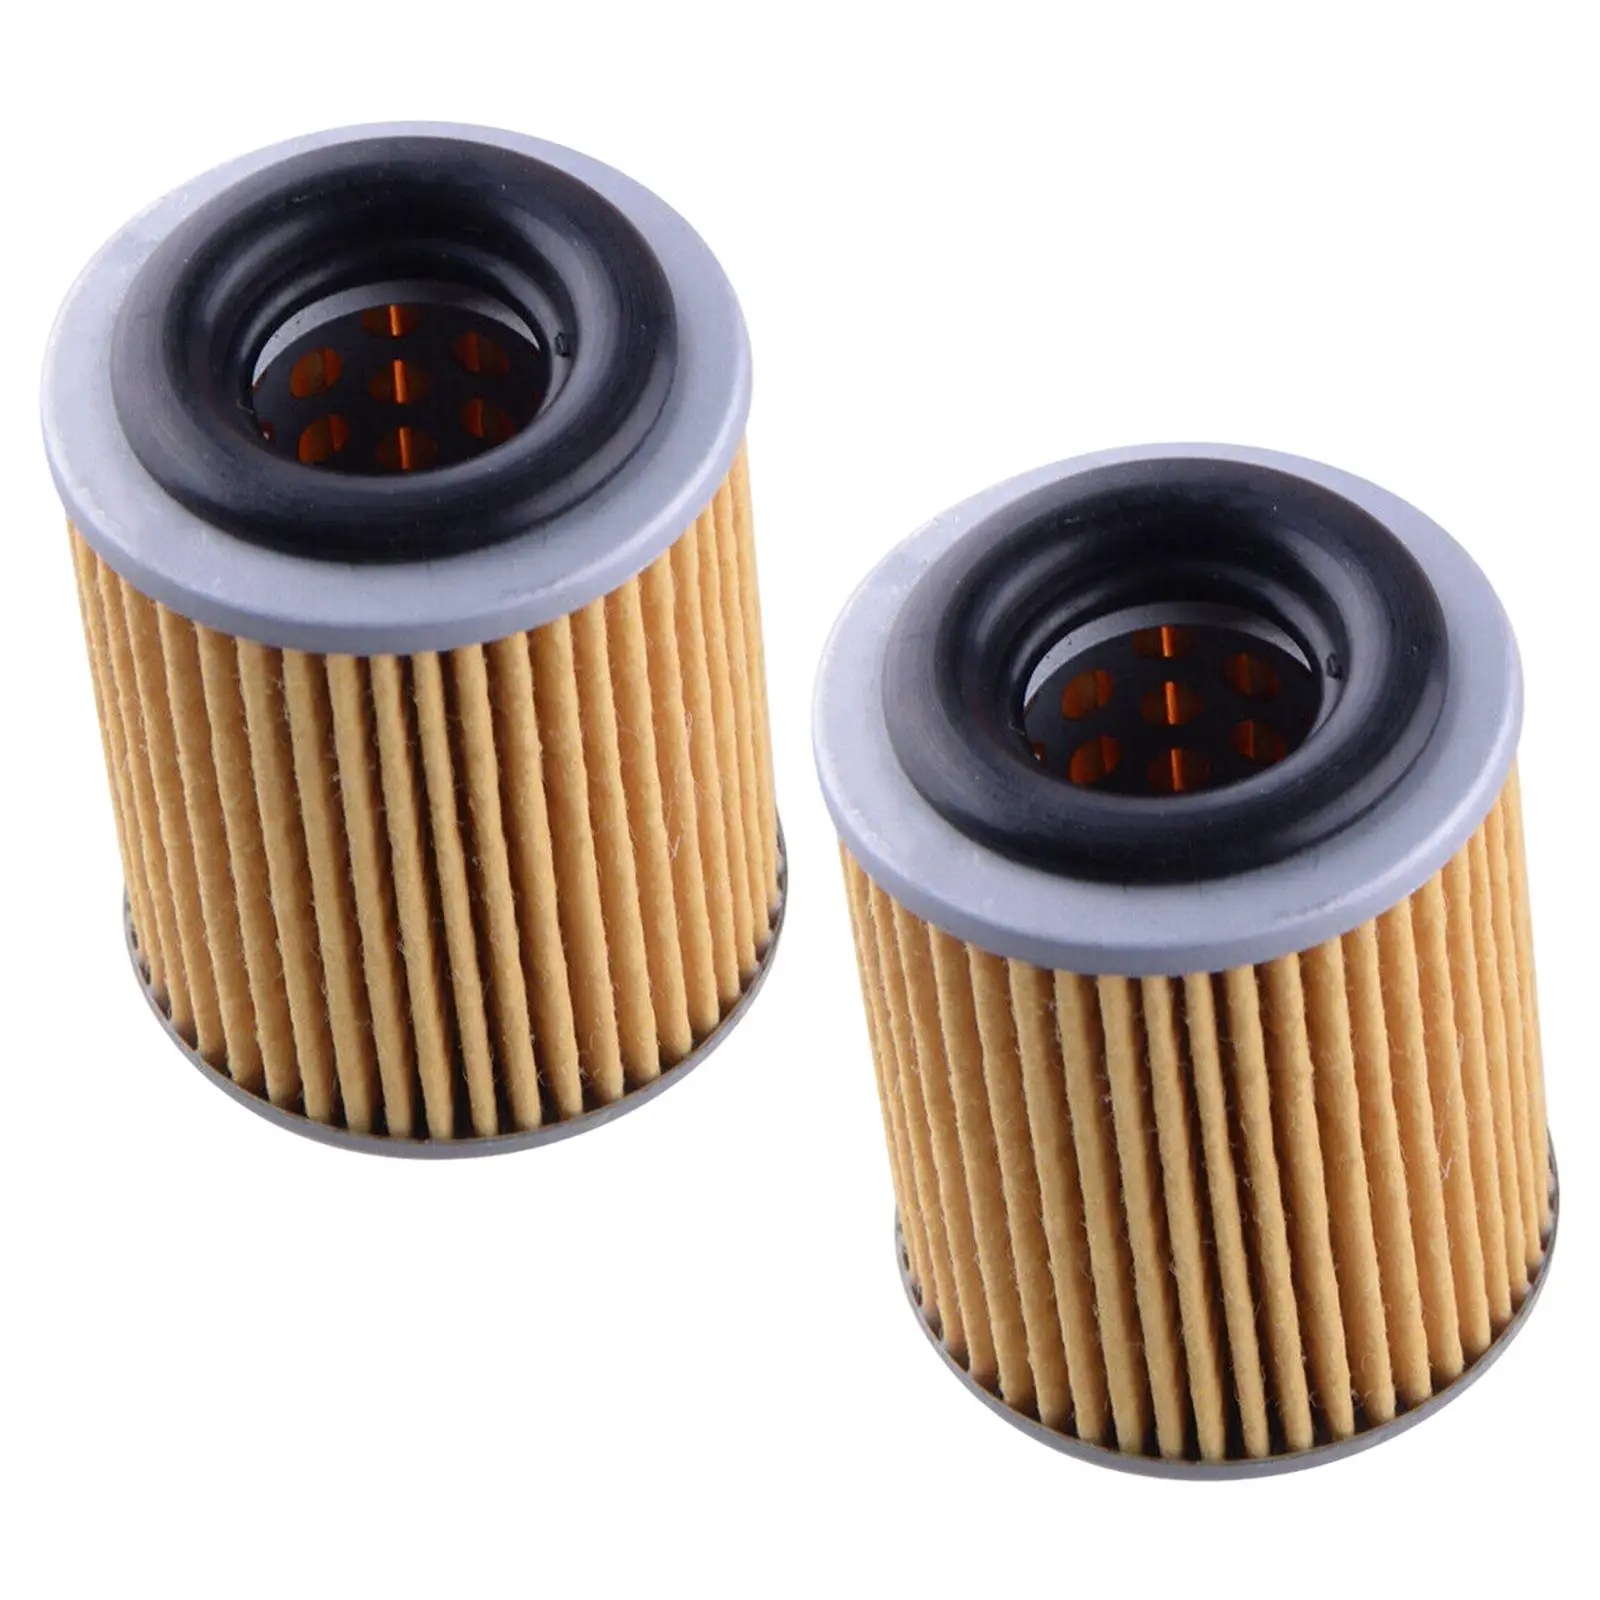 2x Car Auto Transmission Filter Fit for Juke for Rogue 31726-1XF00